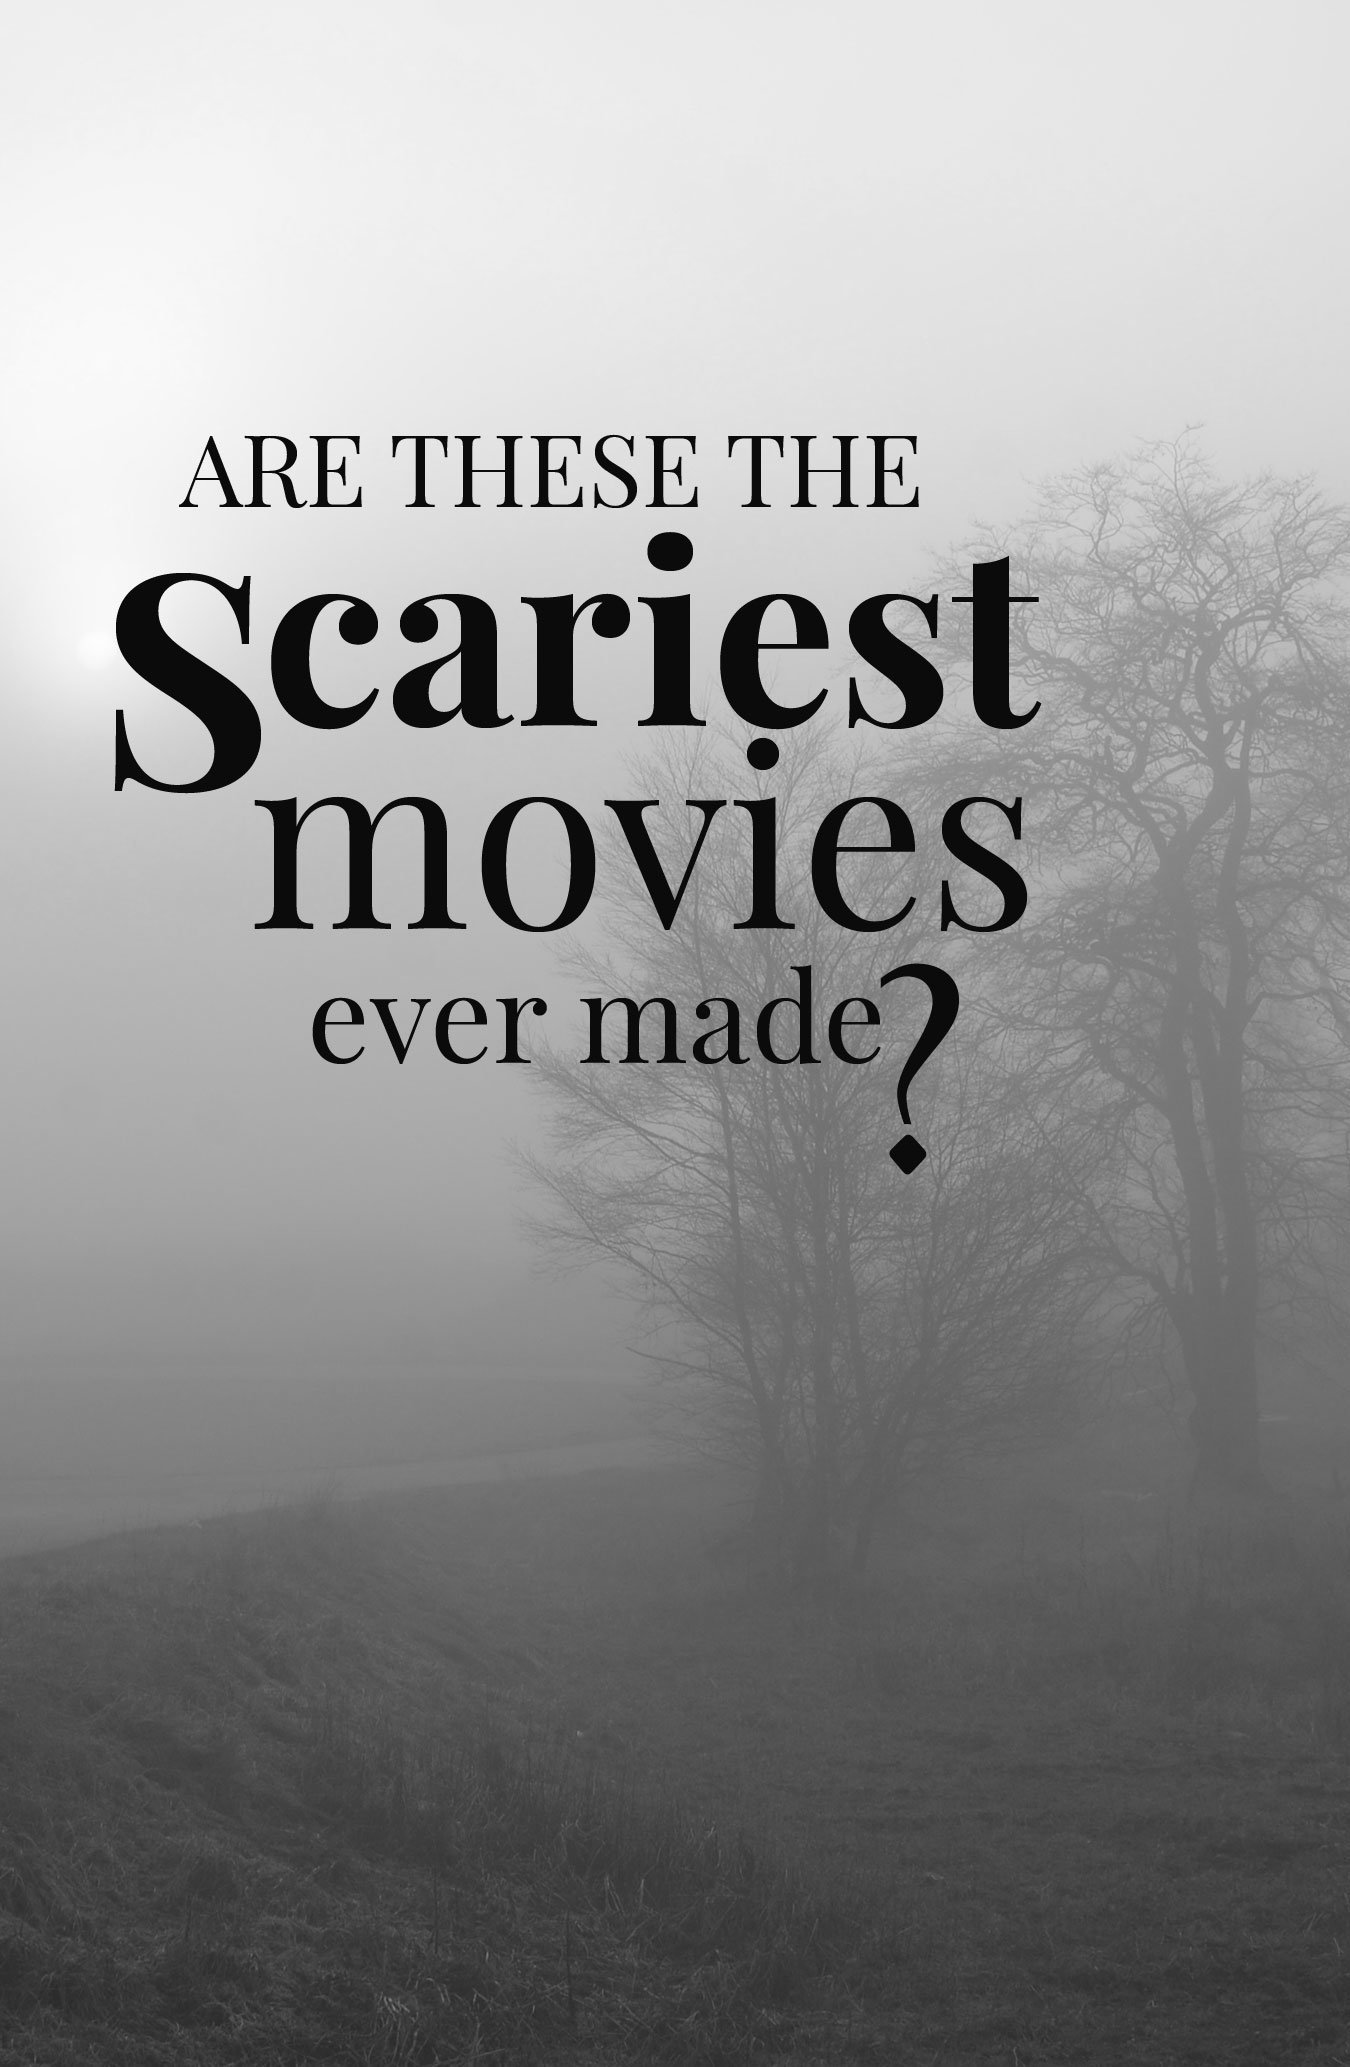 Are these the scariest movies ever made?